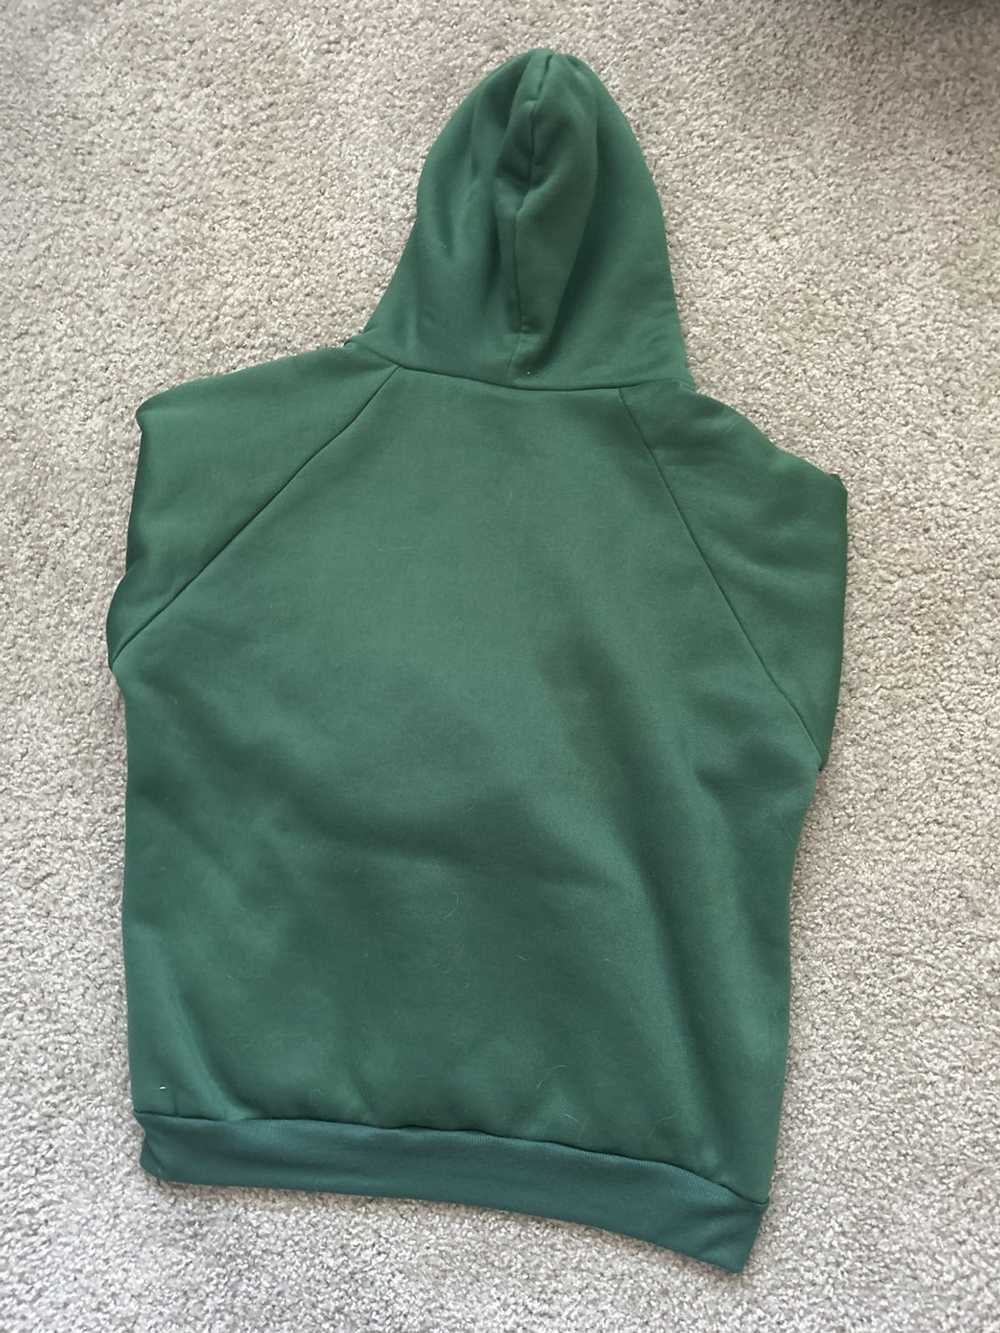 Other Green hoodie XL - image 1